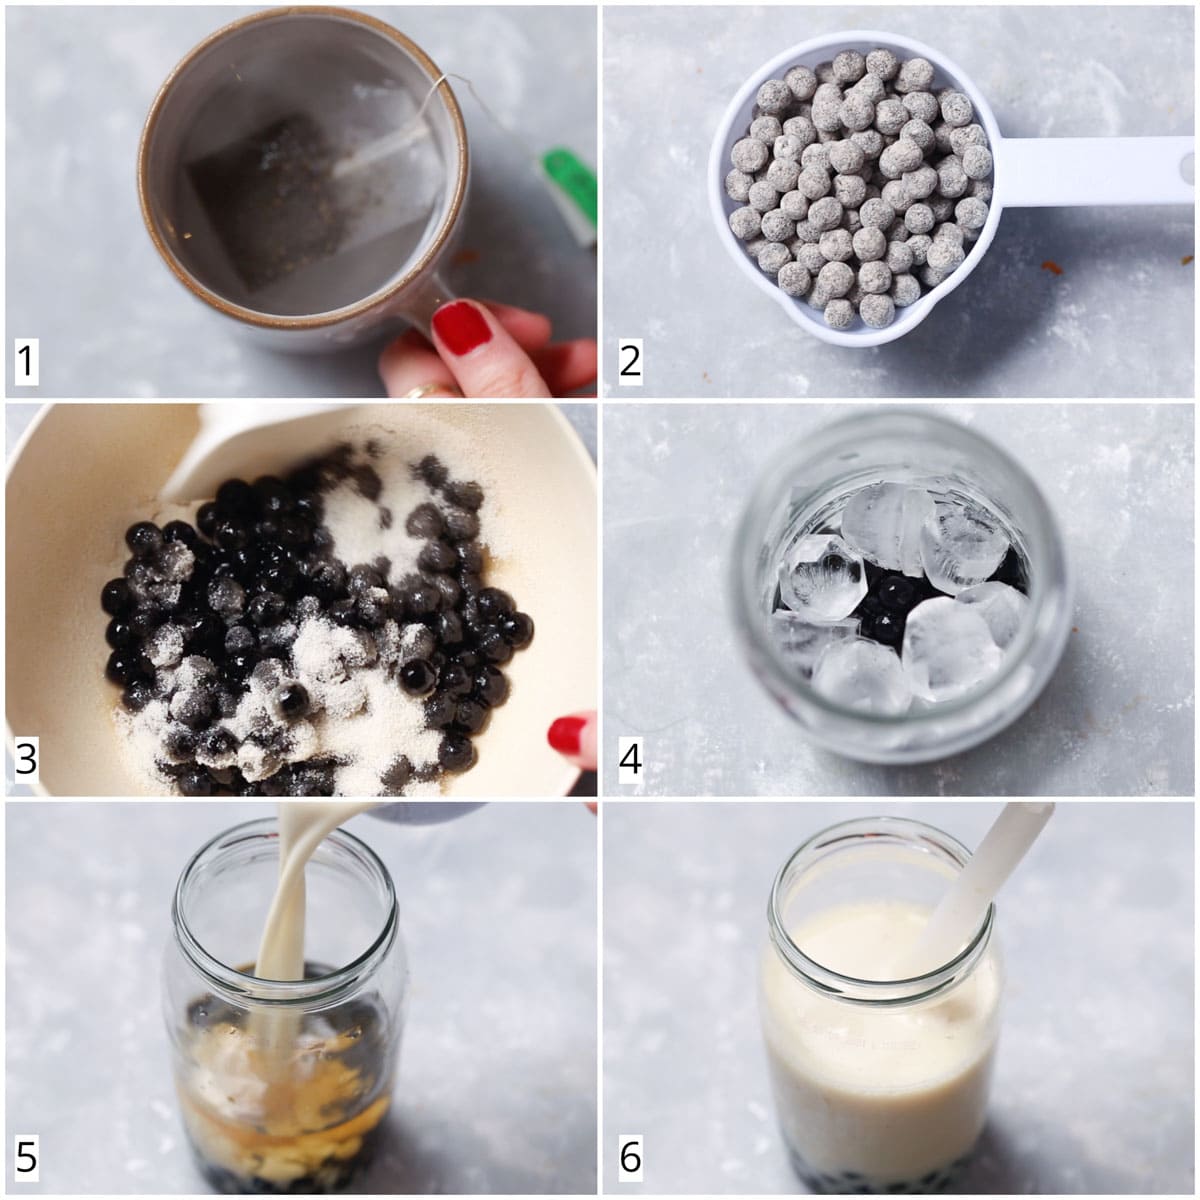 A collage of four images showing steps in making milk tea.